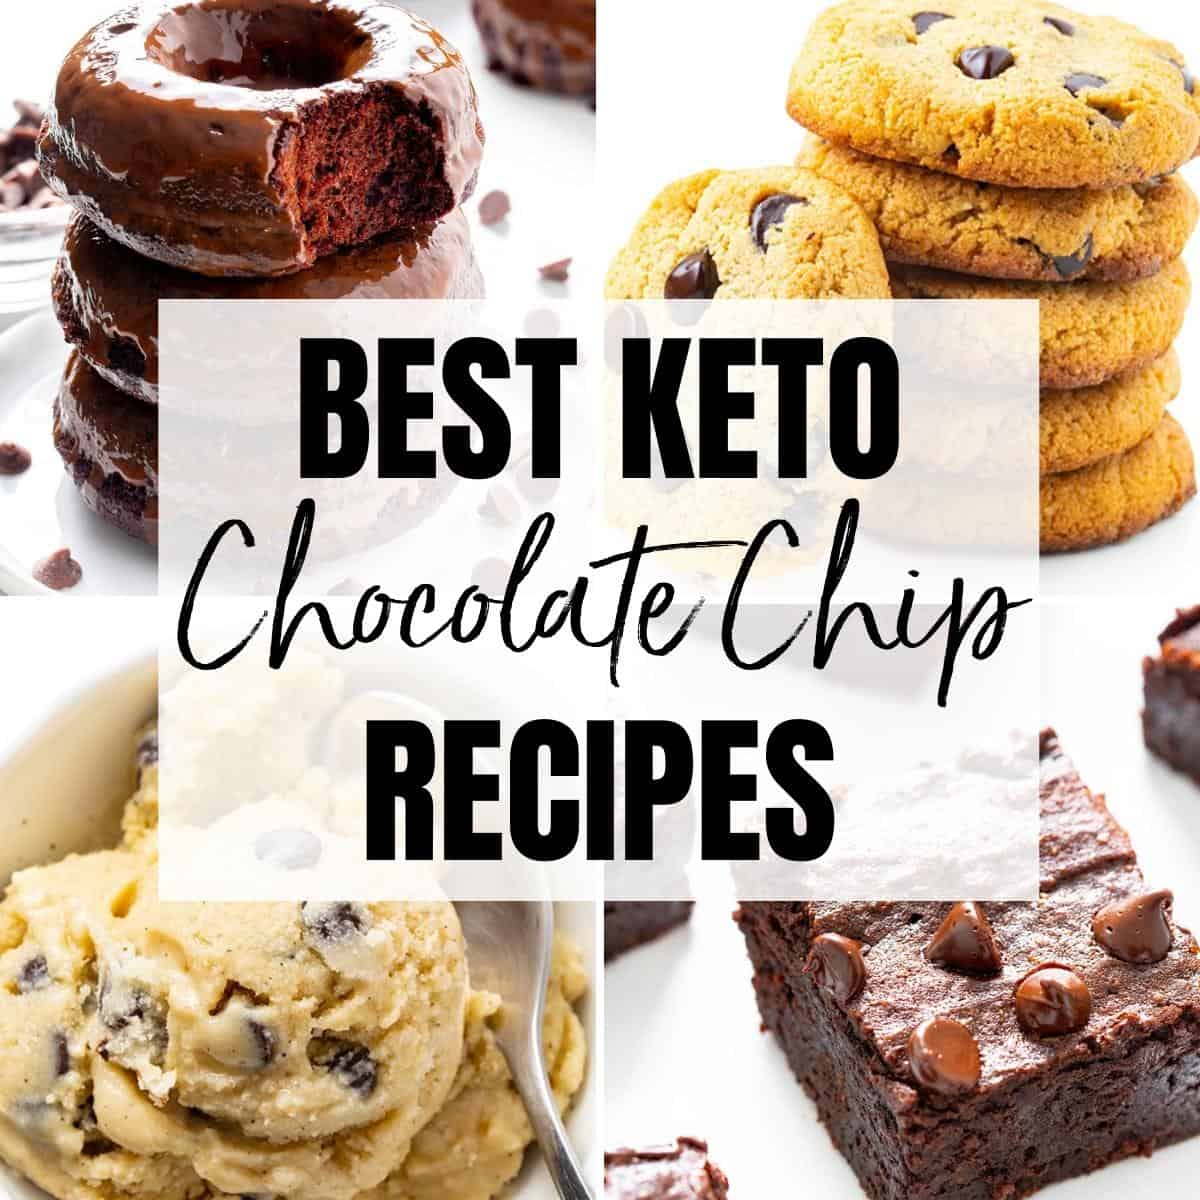 Never a bad time to use keto chocolate chips! Get inspiration for how to use them with these easy recipes for snacks, baked treats, and more.